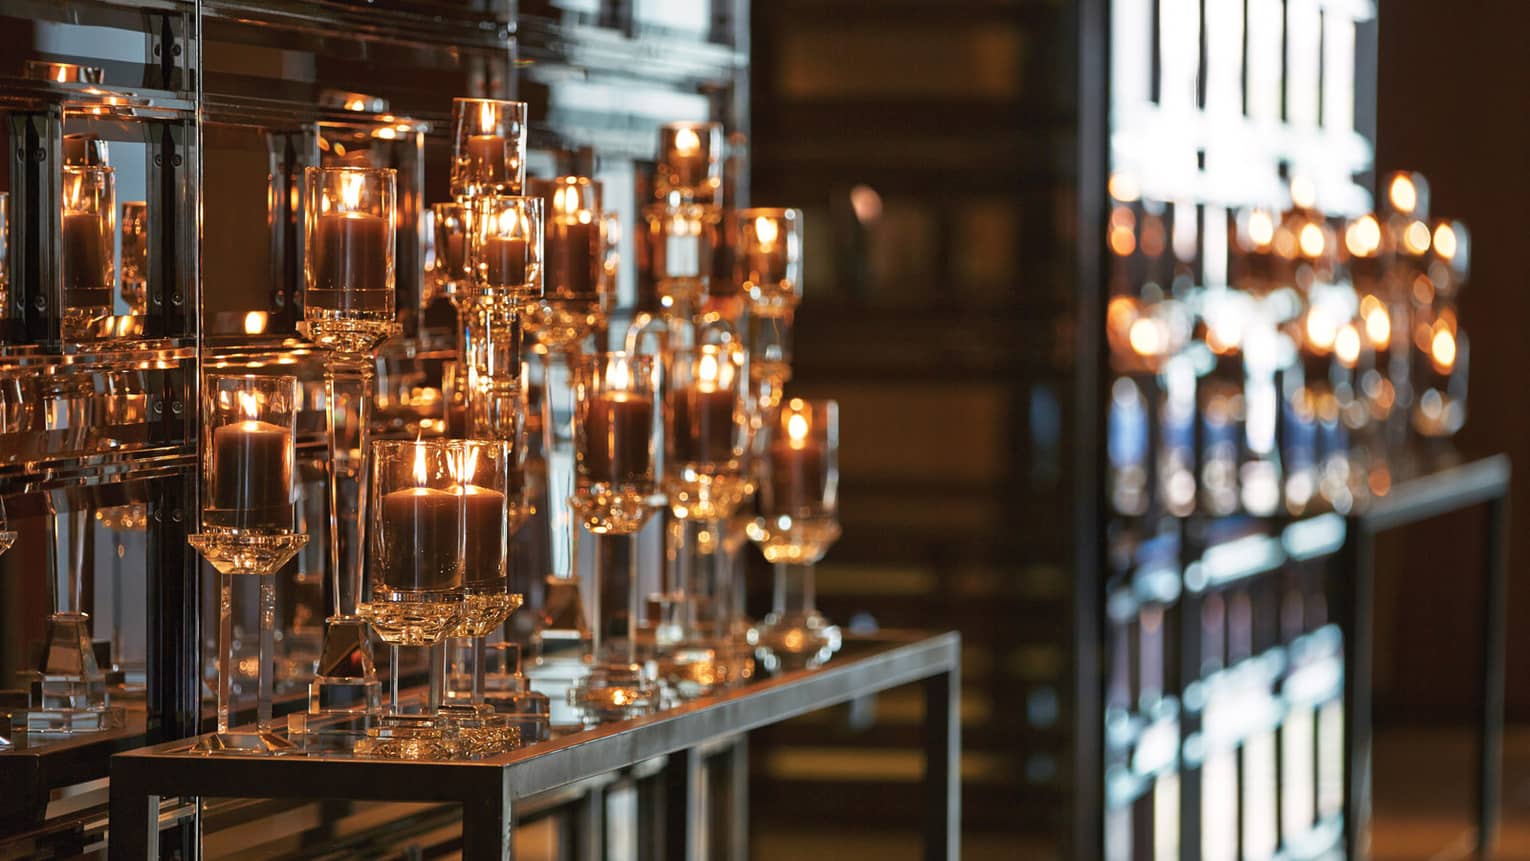 Glowing candles in glass holders displayed on shelf